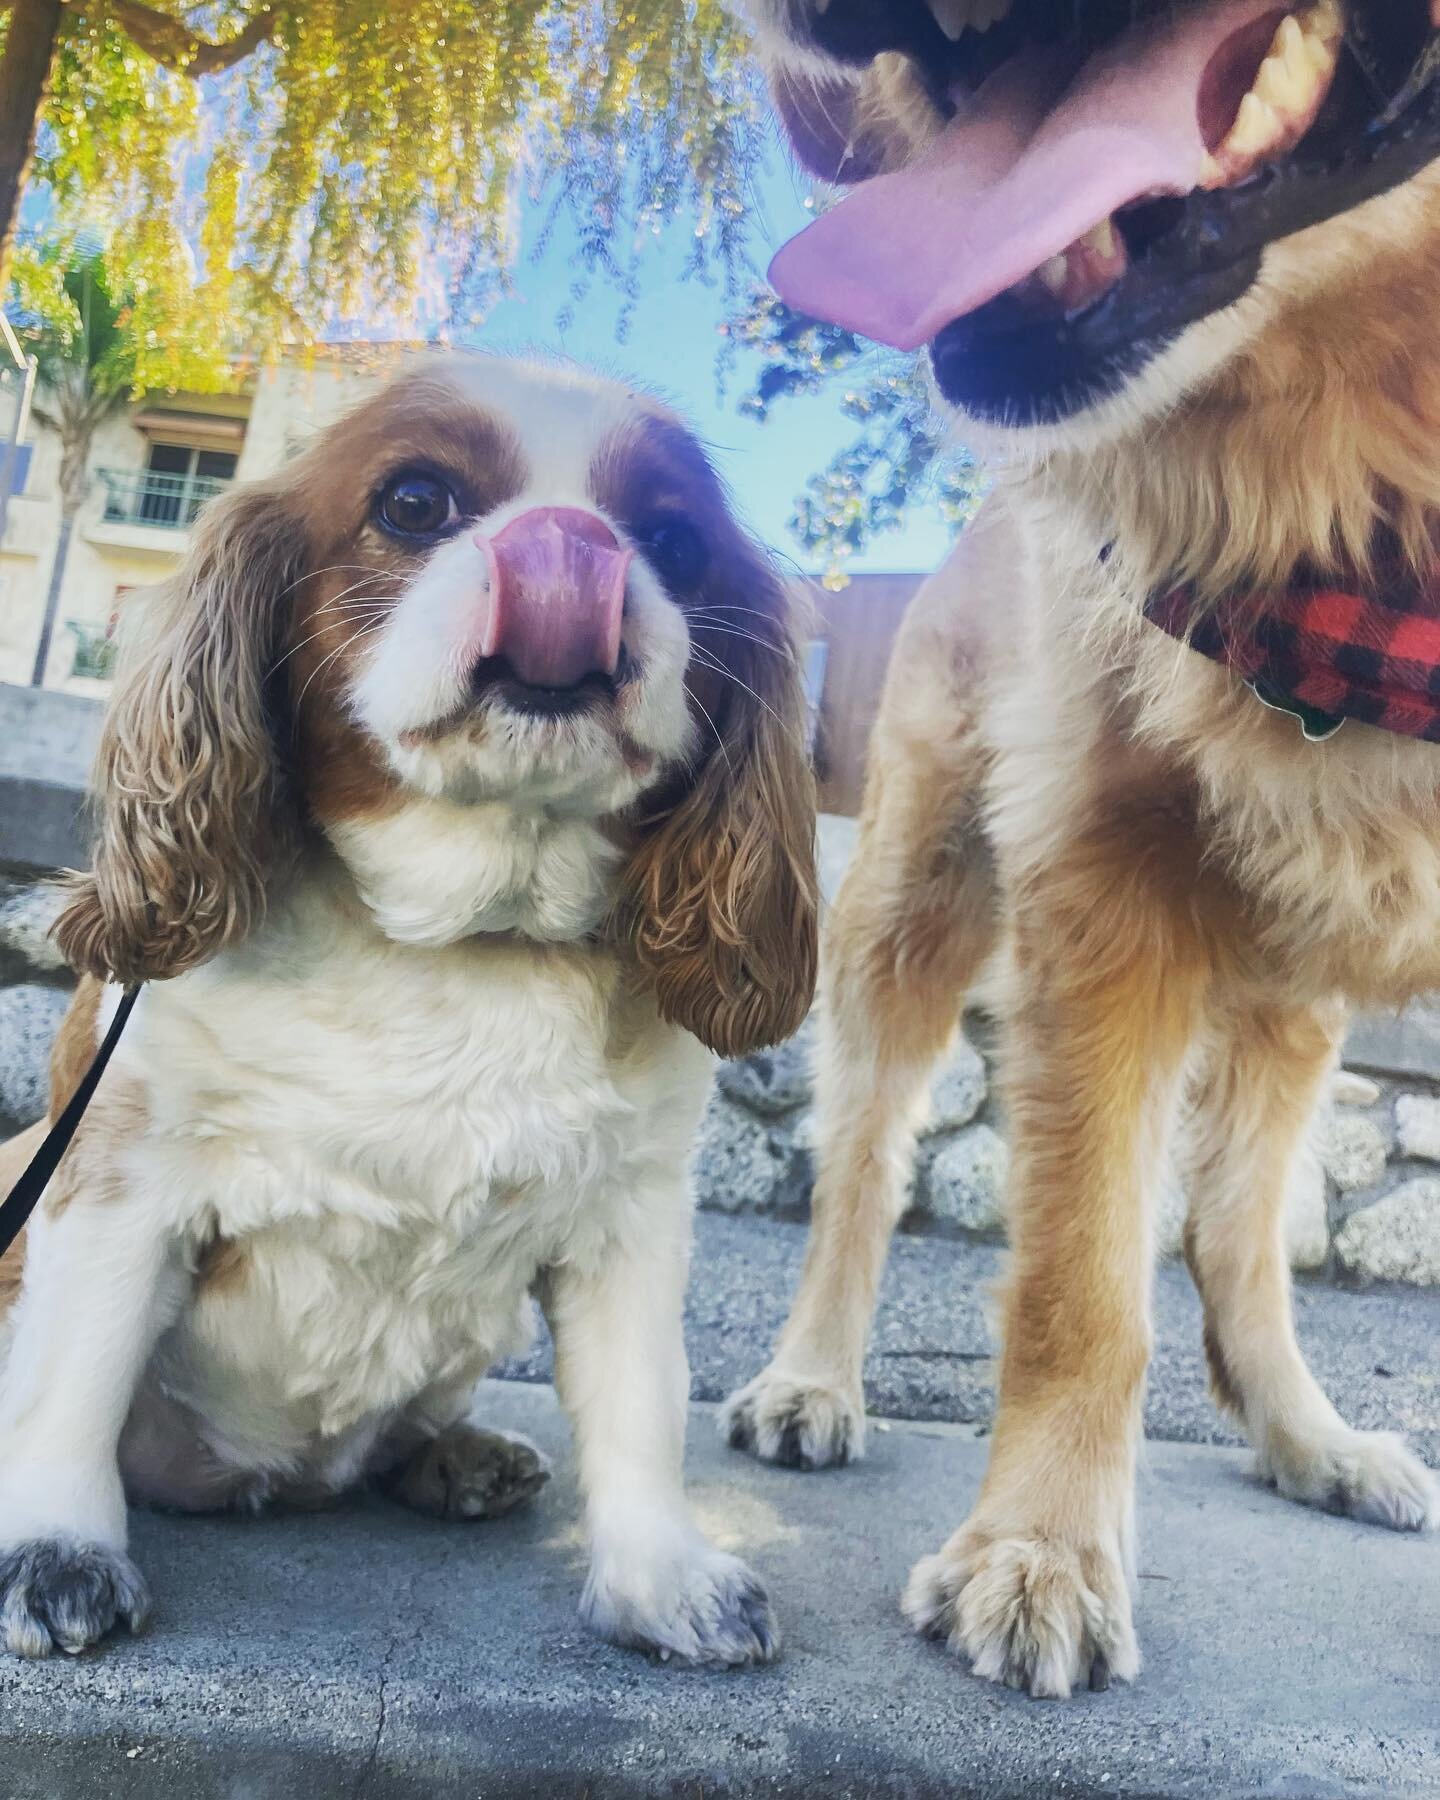 EveryPAWdy give a warm welcome to @tchotchke , our newest little bestie!! Oliver the #goldenretriever has had a crush on Tchotchke furrever and today he finally got to walk alongside her!! When Sam took Oliver to her door he immediately knew it was T